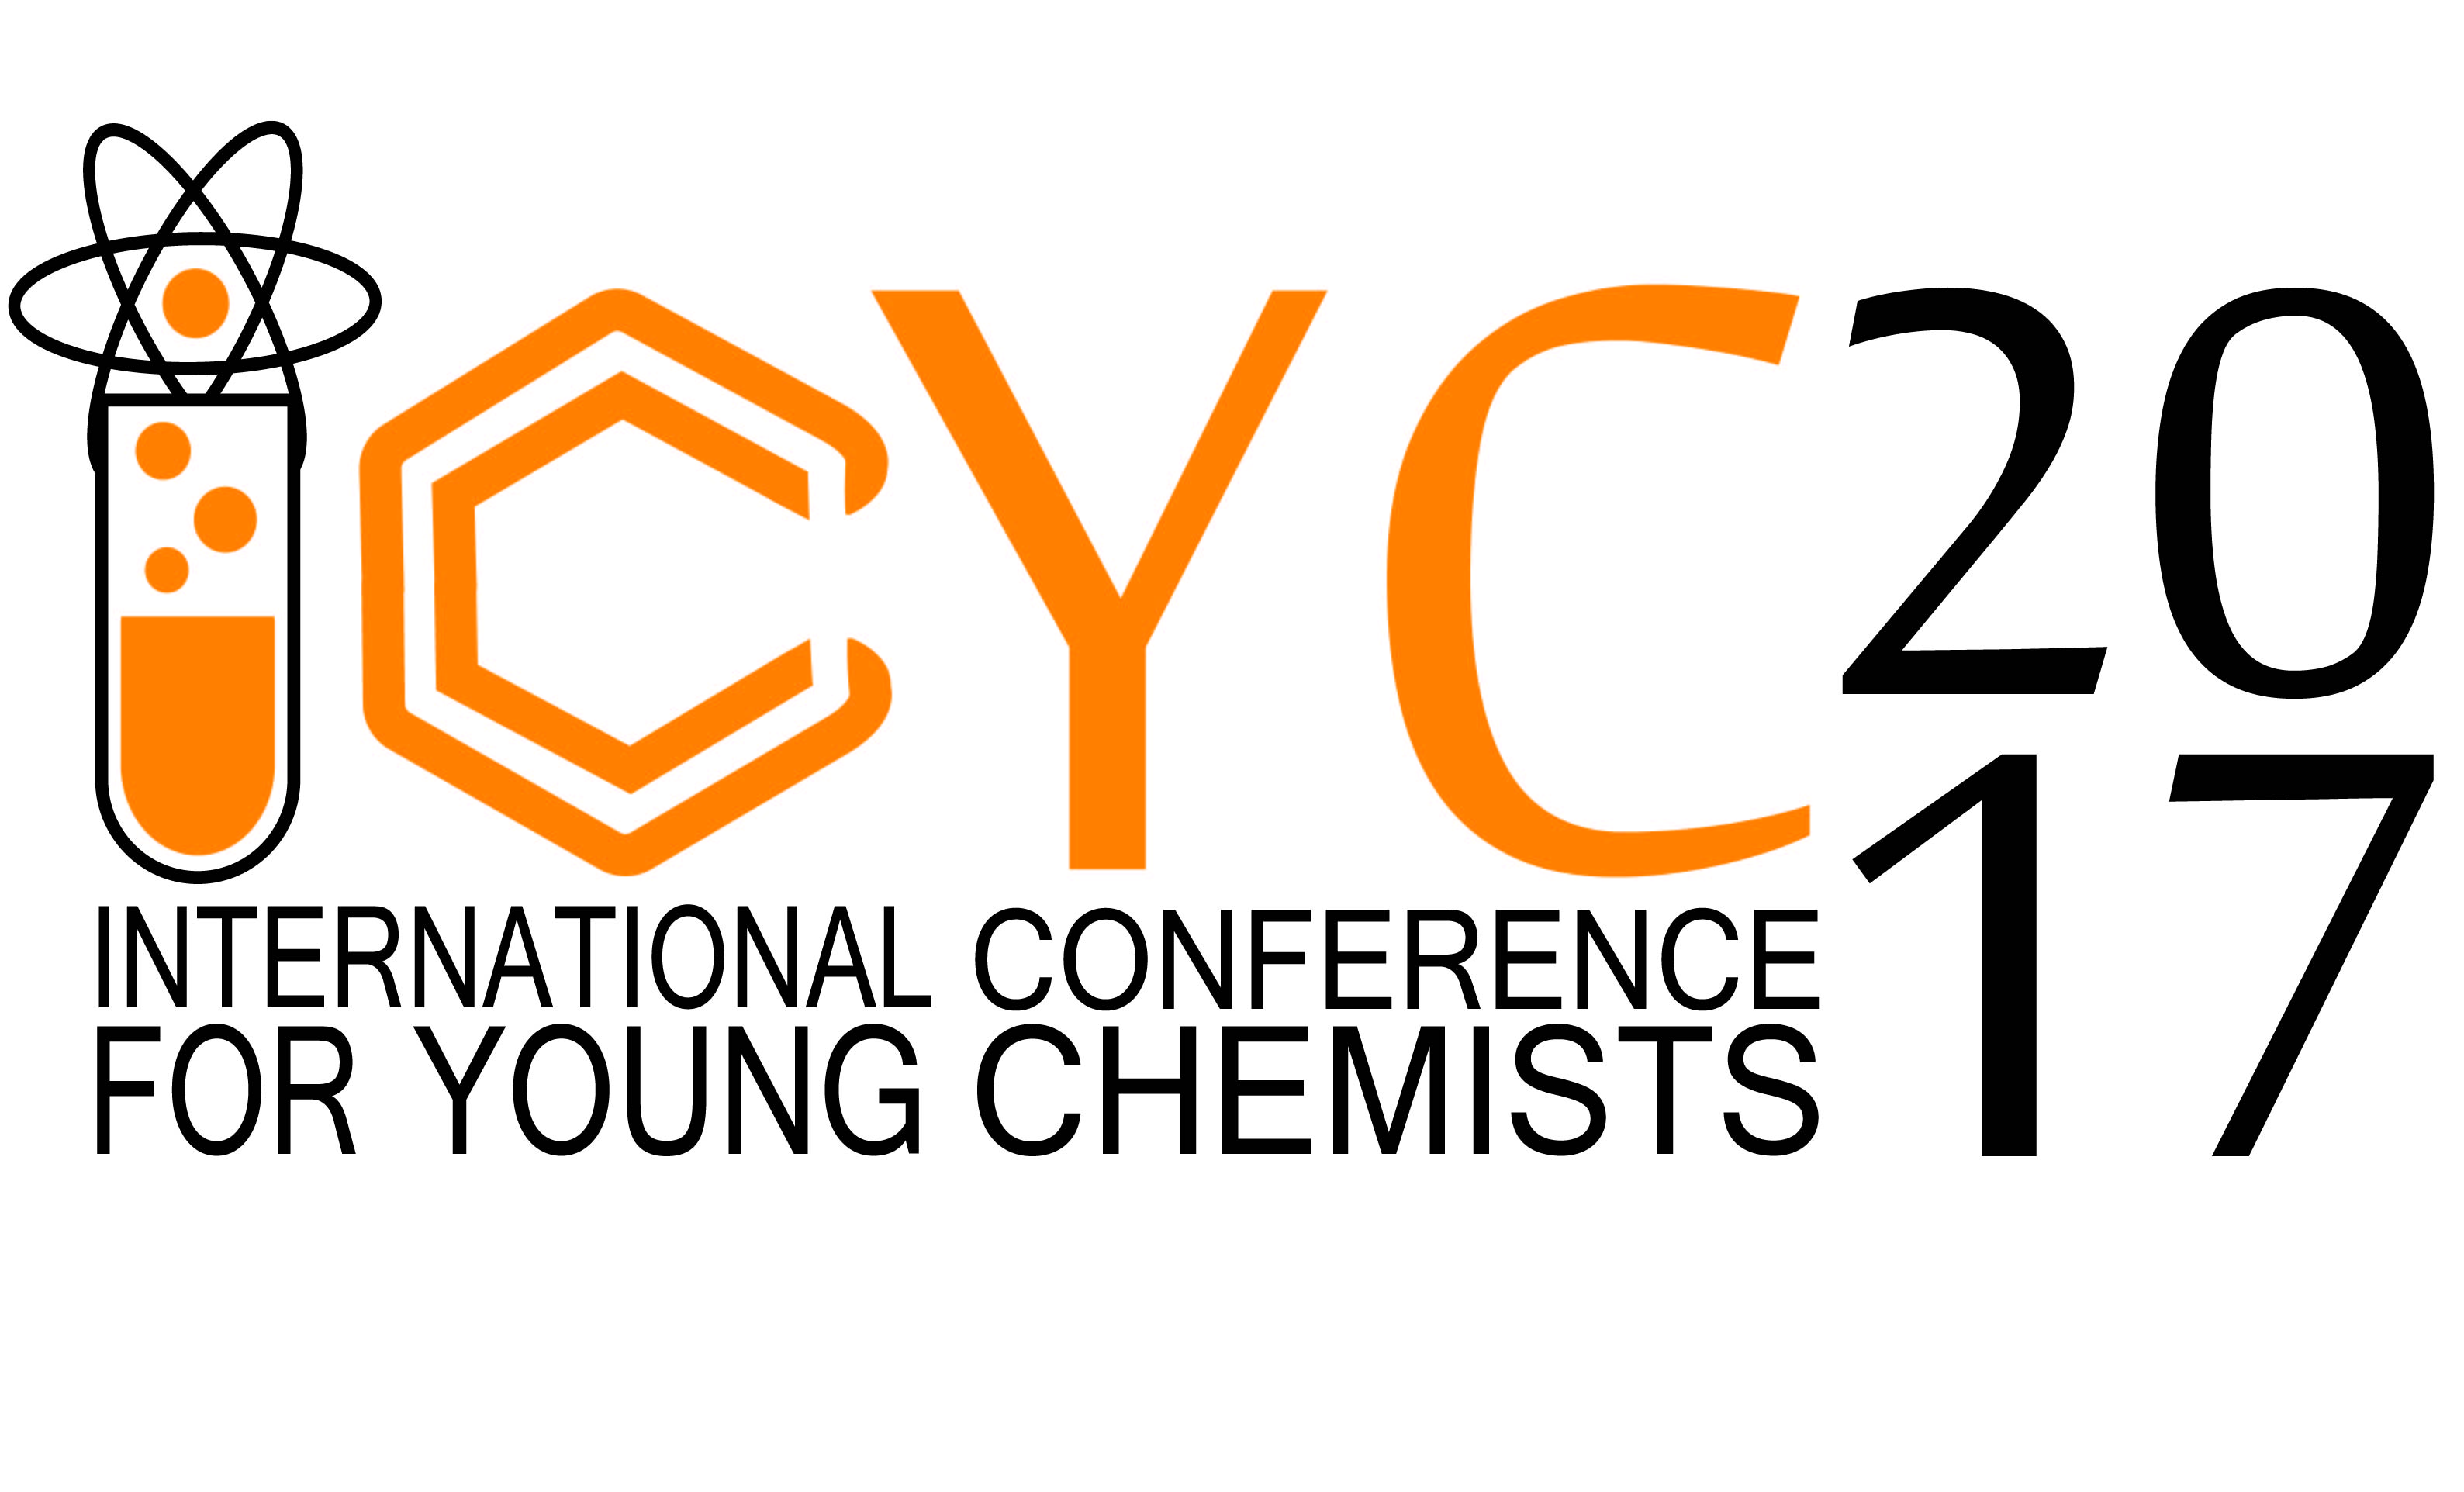 The International Conference for Young Chemists (ICYC) is a biennial conference organized by the postgraduate students of the School of Chemical Sciences, Universiti Sains Malaysia with the aim to bring local and international researchers together to facilitate interaction and networking among researchers in the field of chemistry.

The ICYC 2017 will consist of oral and poster presentations. In addition to that, prominent researchers in their respective fields of Chemistry , from academic and industry, will be invited to deliver plenary lectures to inspire and share their knowledge with the younger generation of upcoming researchers.